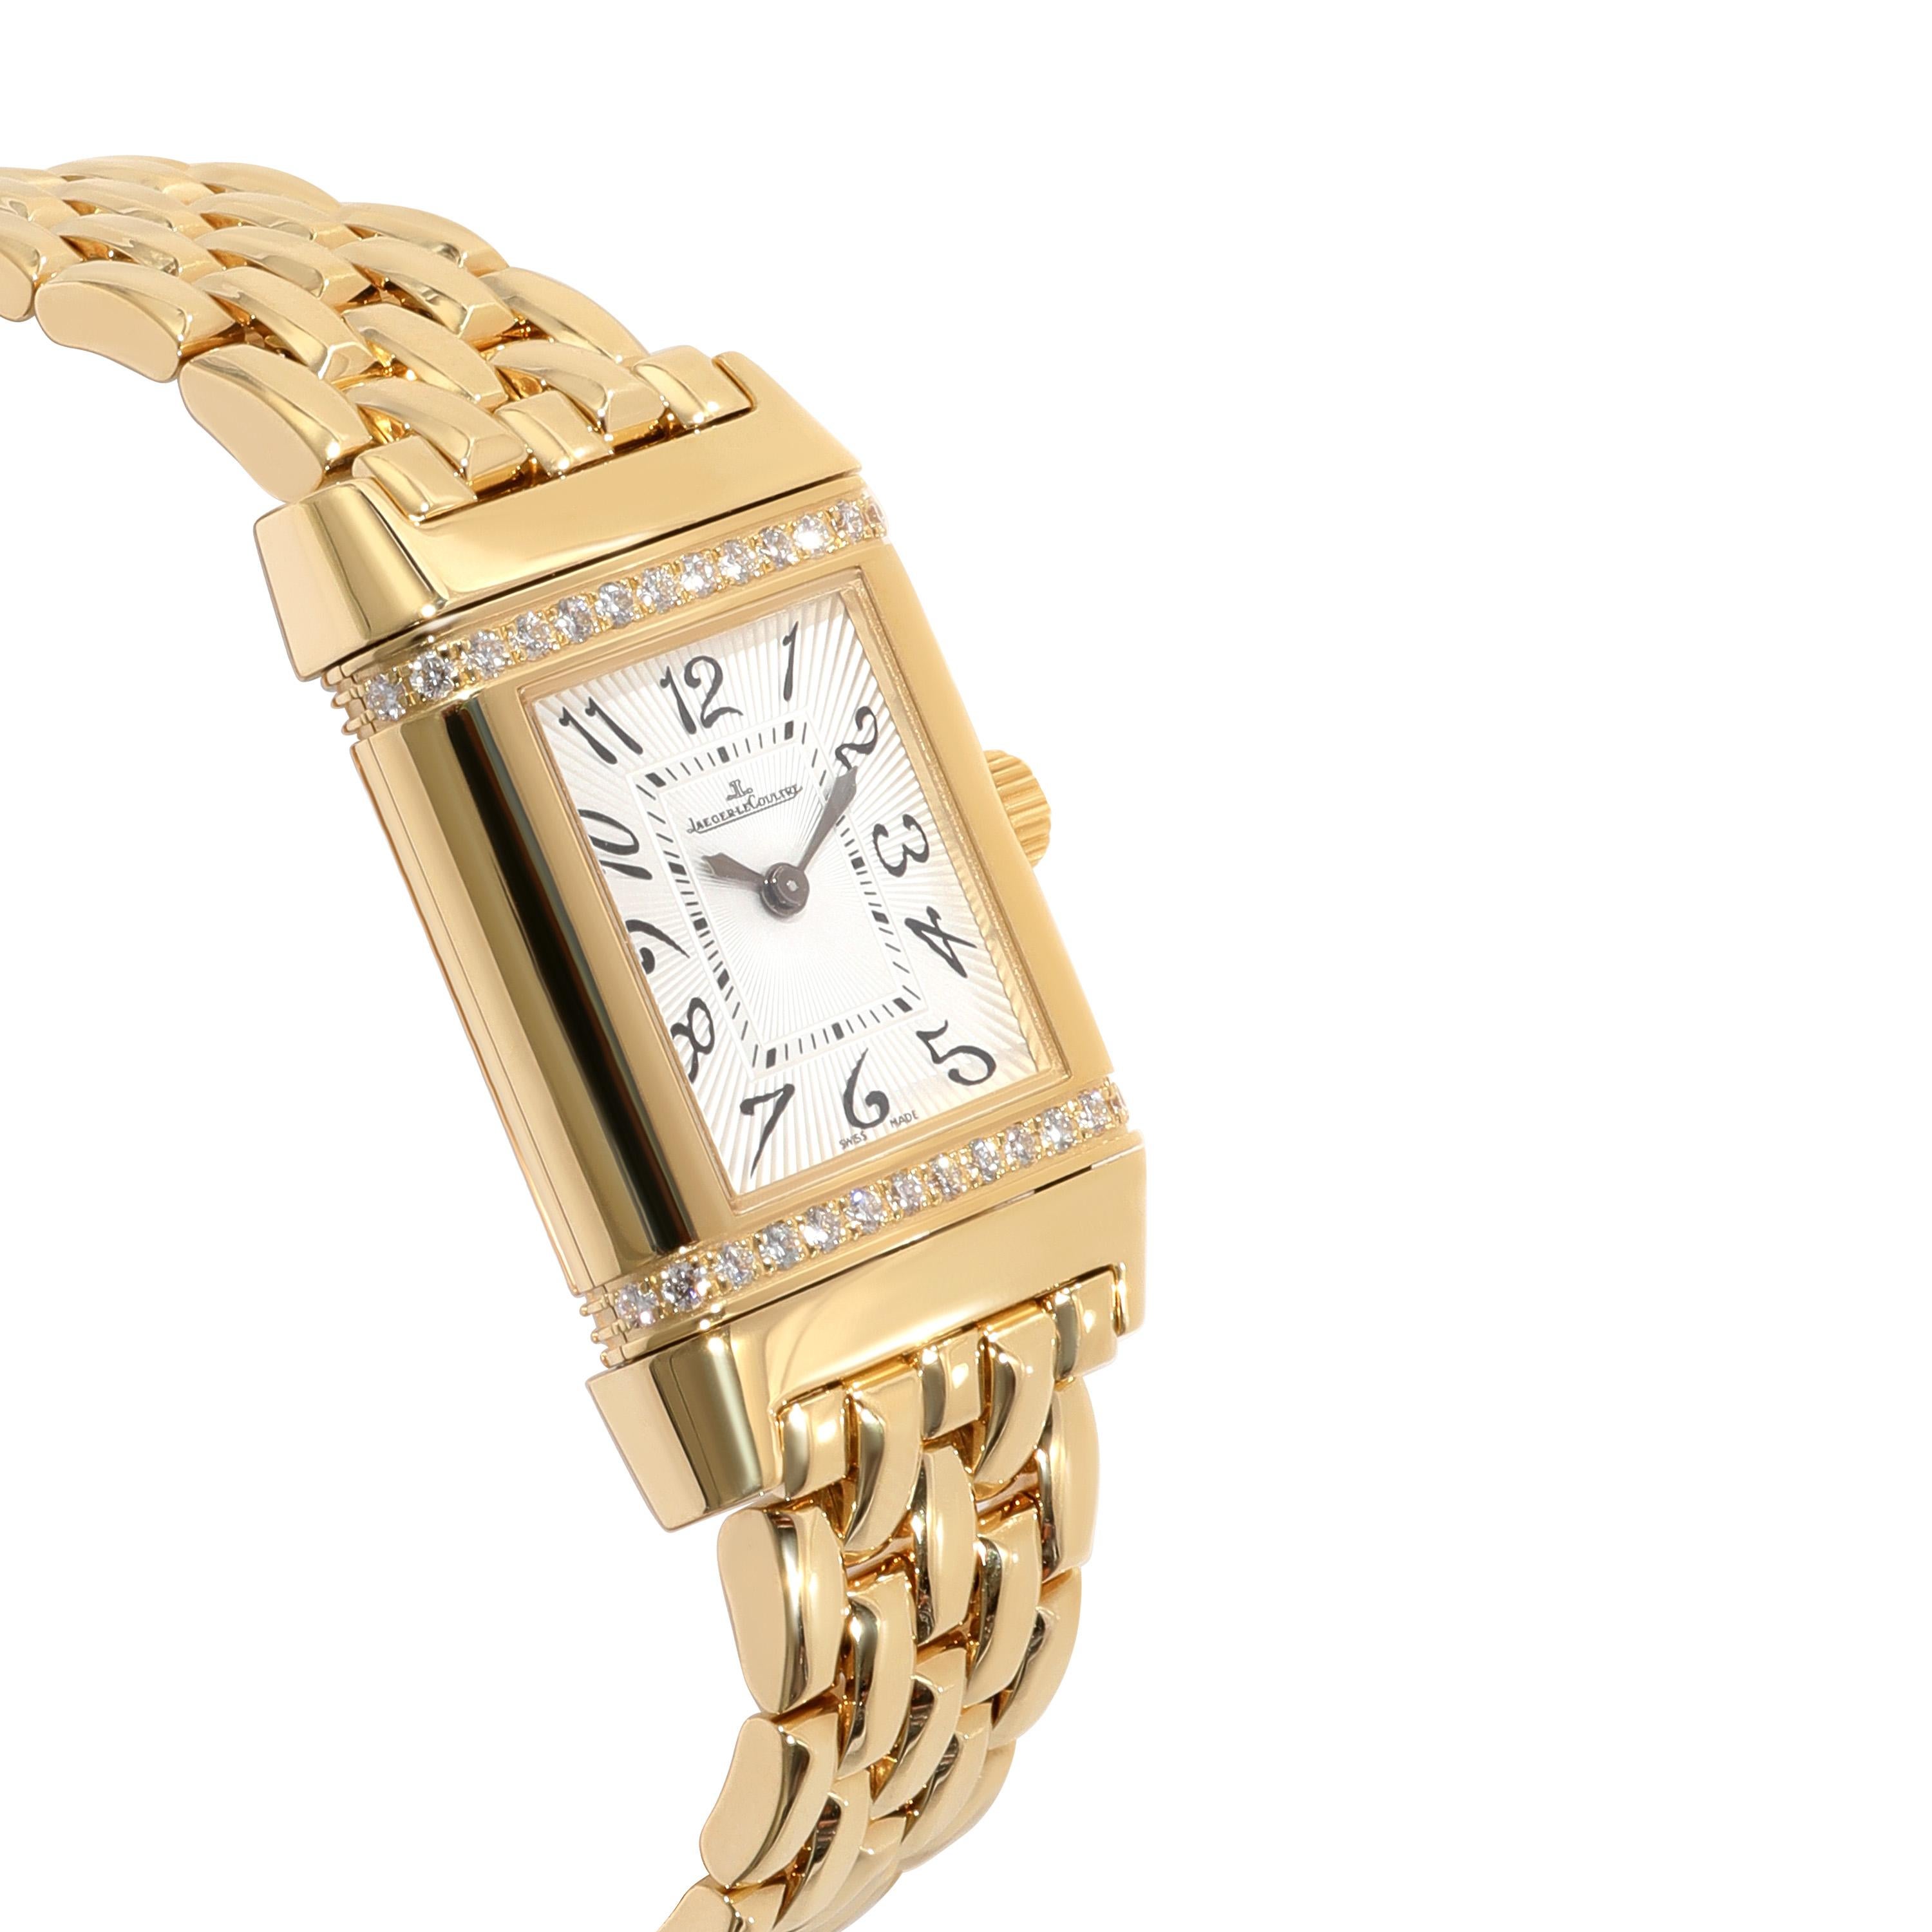 Jaeger-LeCoultre Reverso 265.1.08 Women's Watch in 18kt Yellow Gold 1